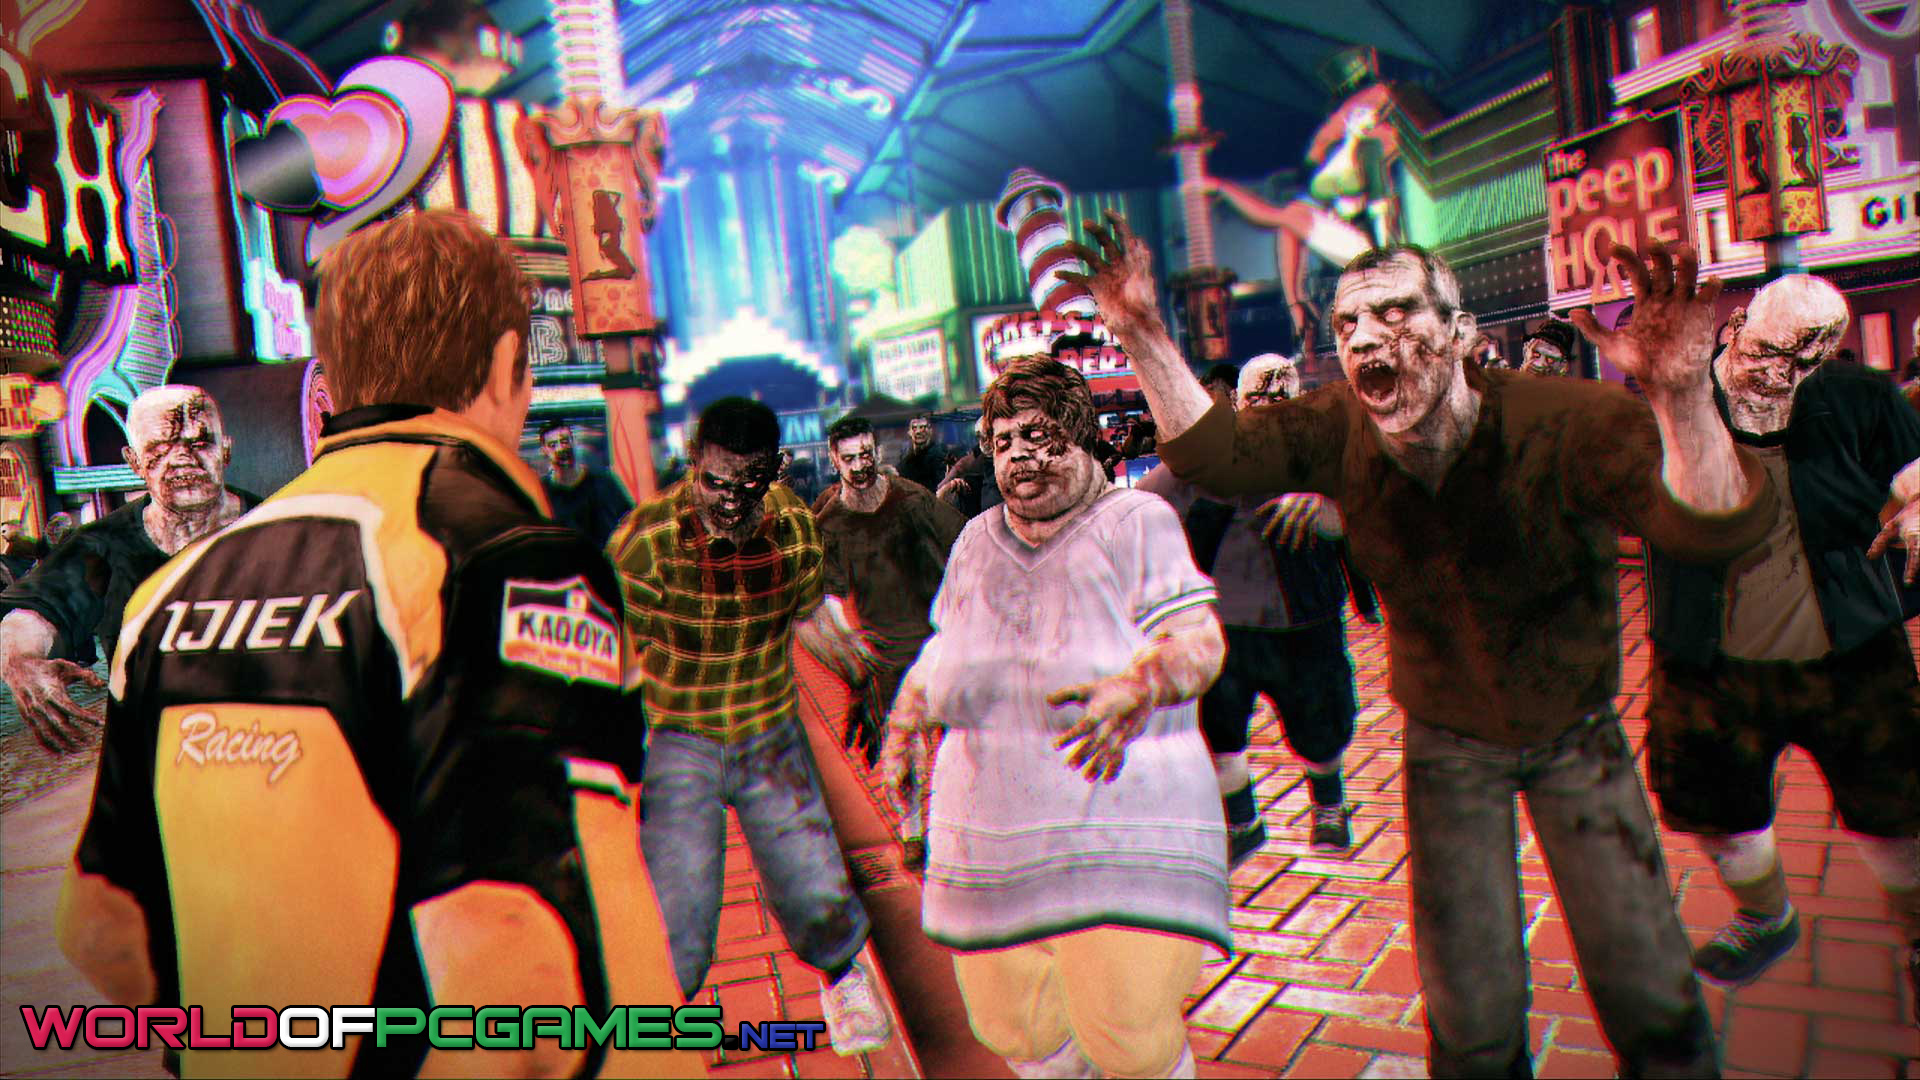 Dead Rising 2 Free Download By worldof-pcgames.net